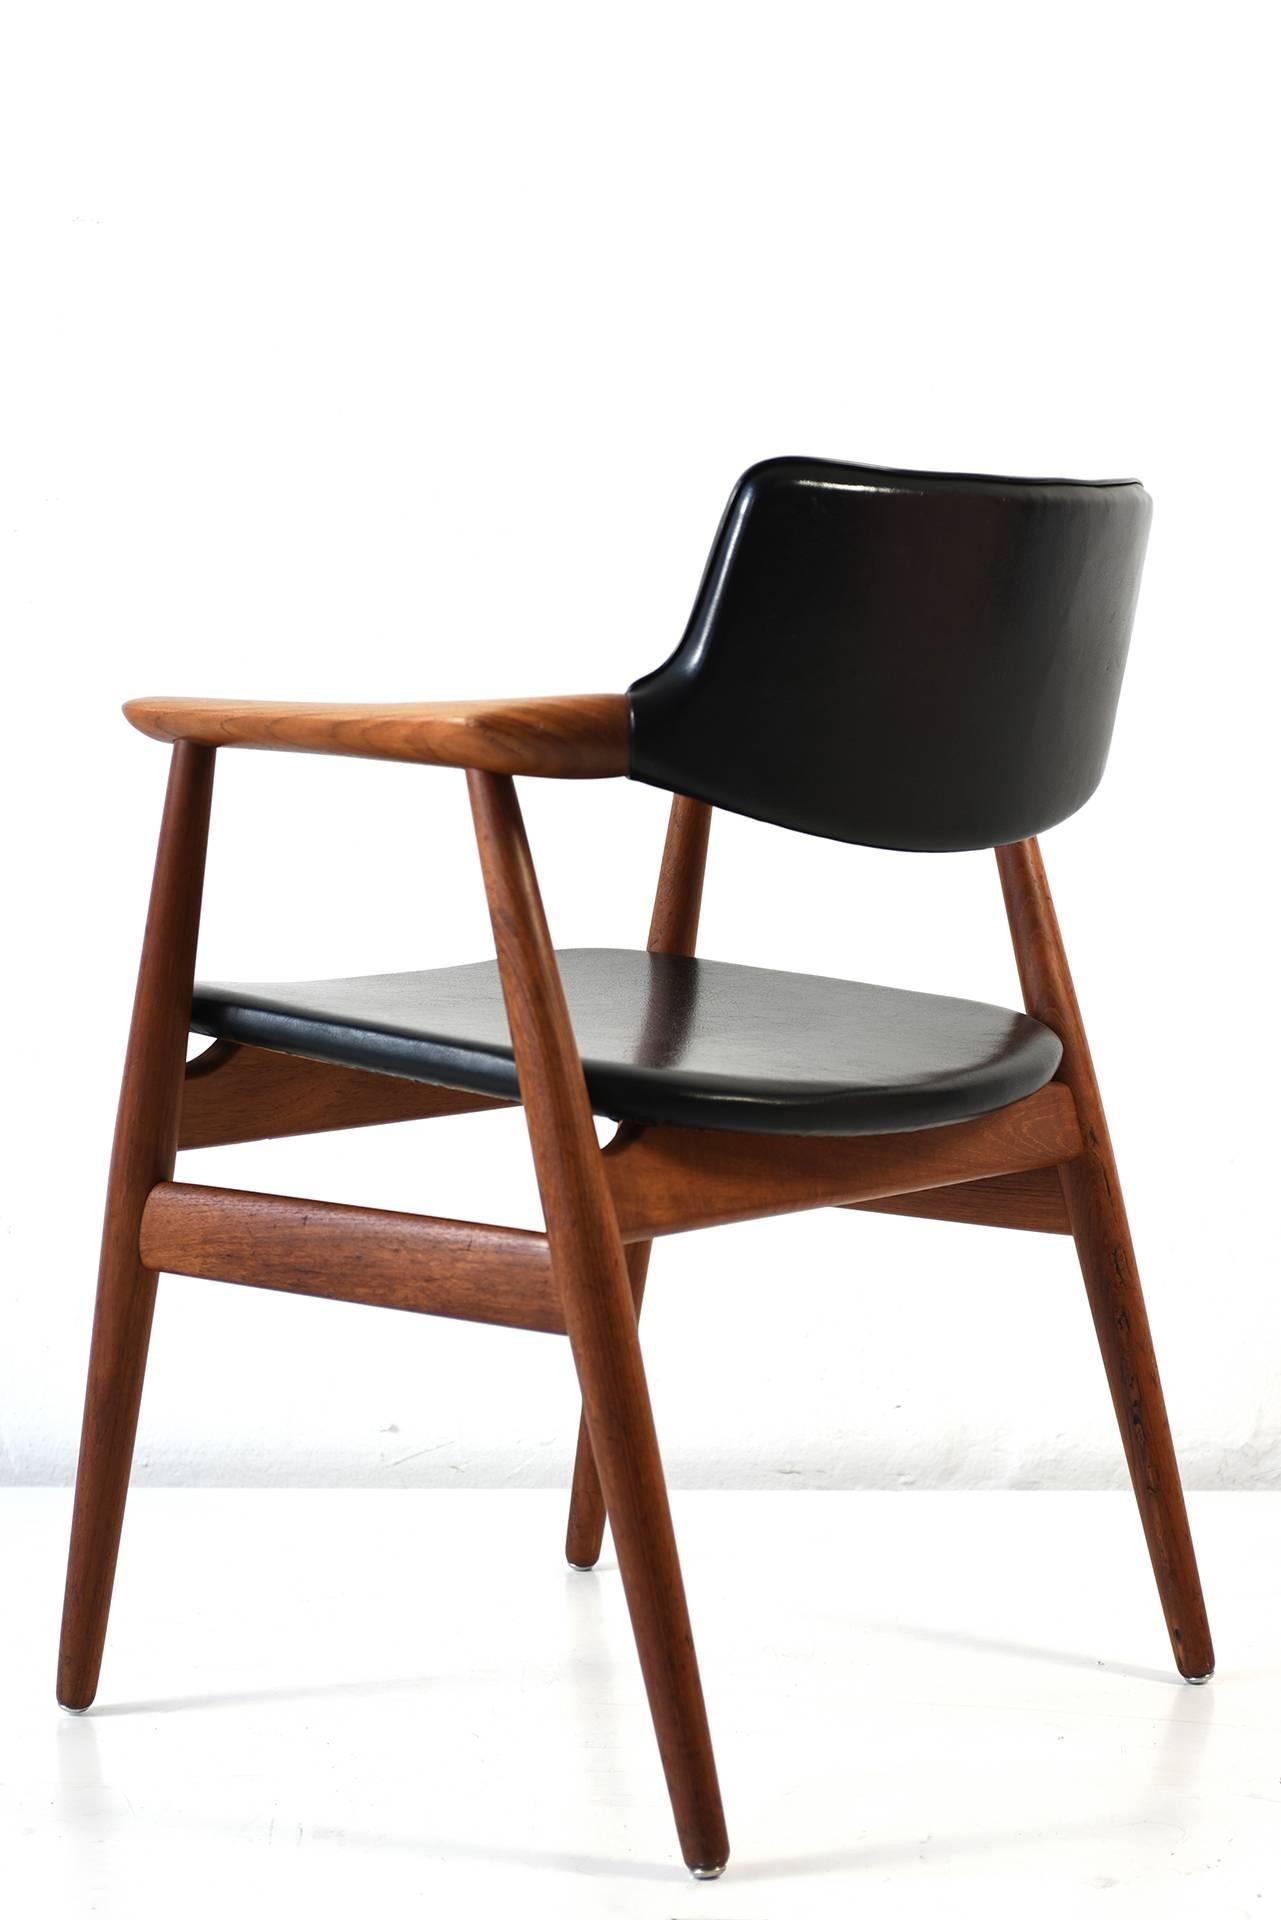 All constructive parts are executed in solid teak in amorphous forms. Erik Kierkegaard did the design circa 1965 for Glostrup Furniture Company, Denmark.